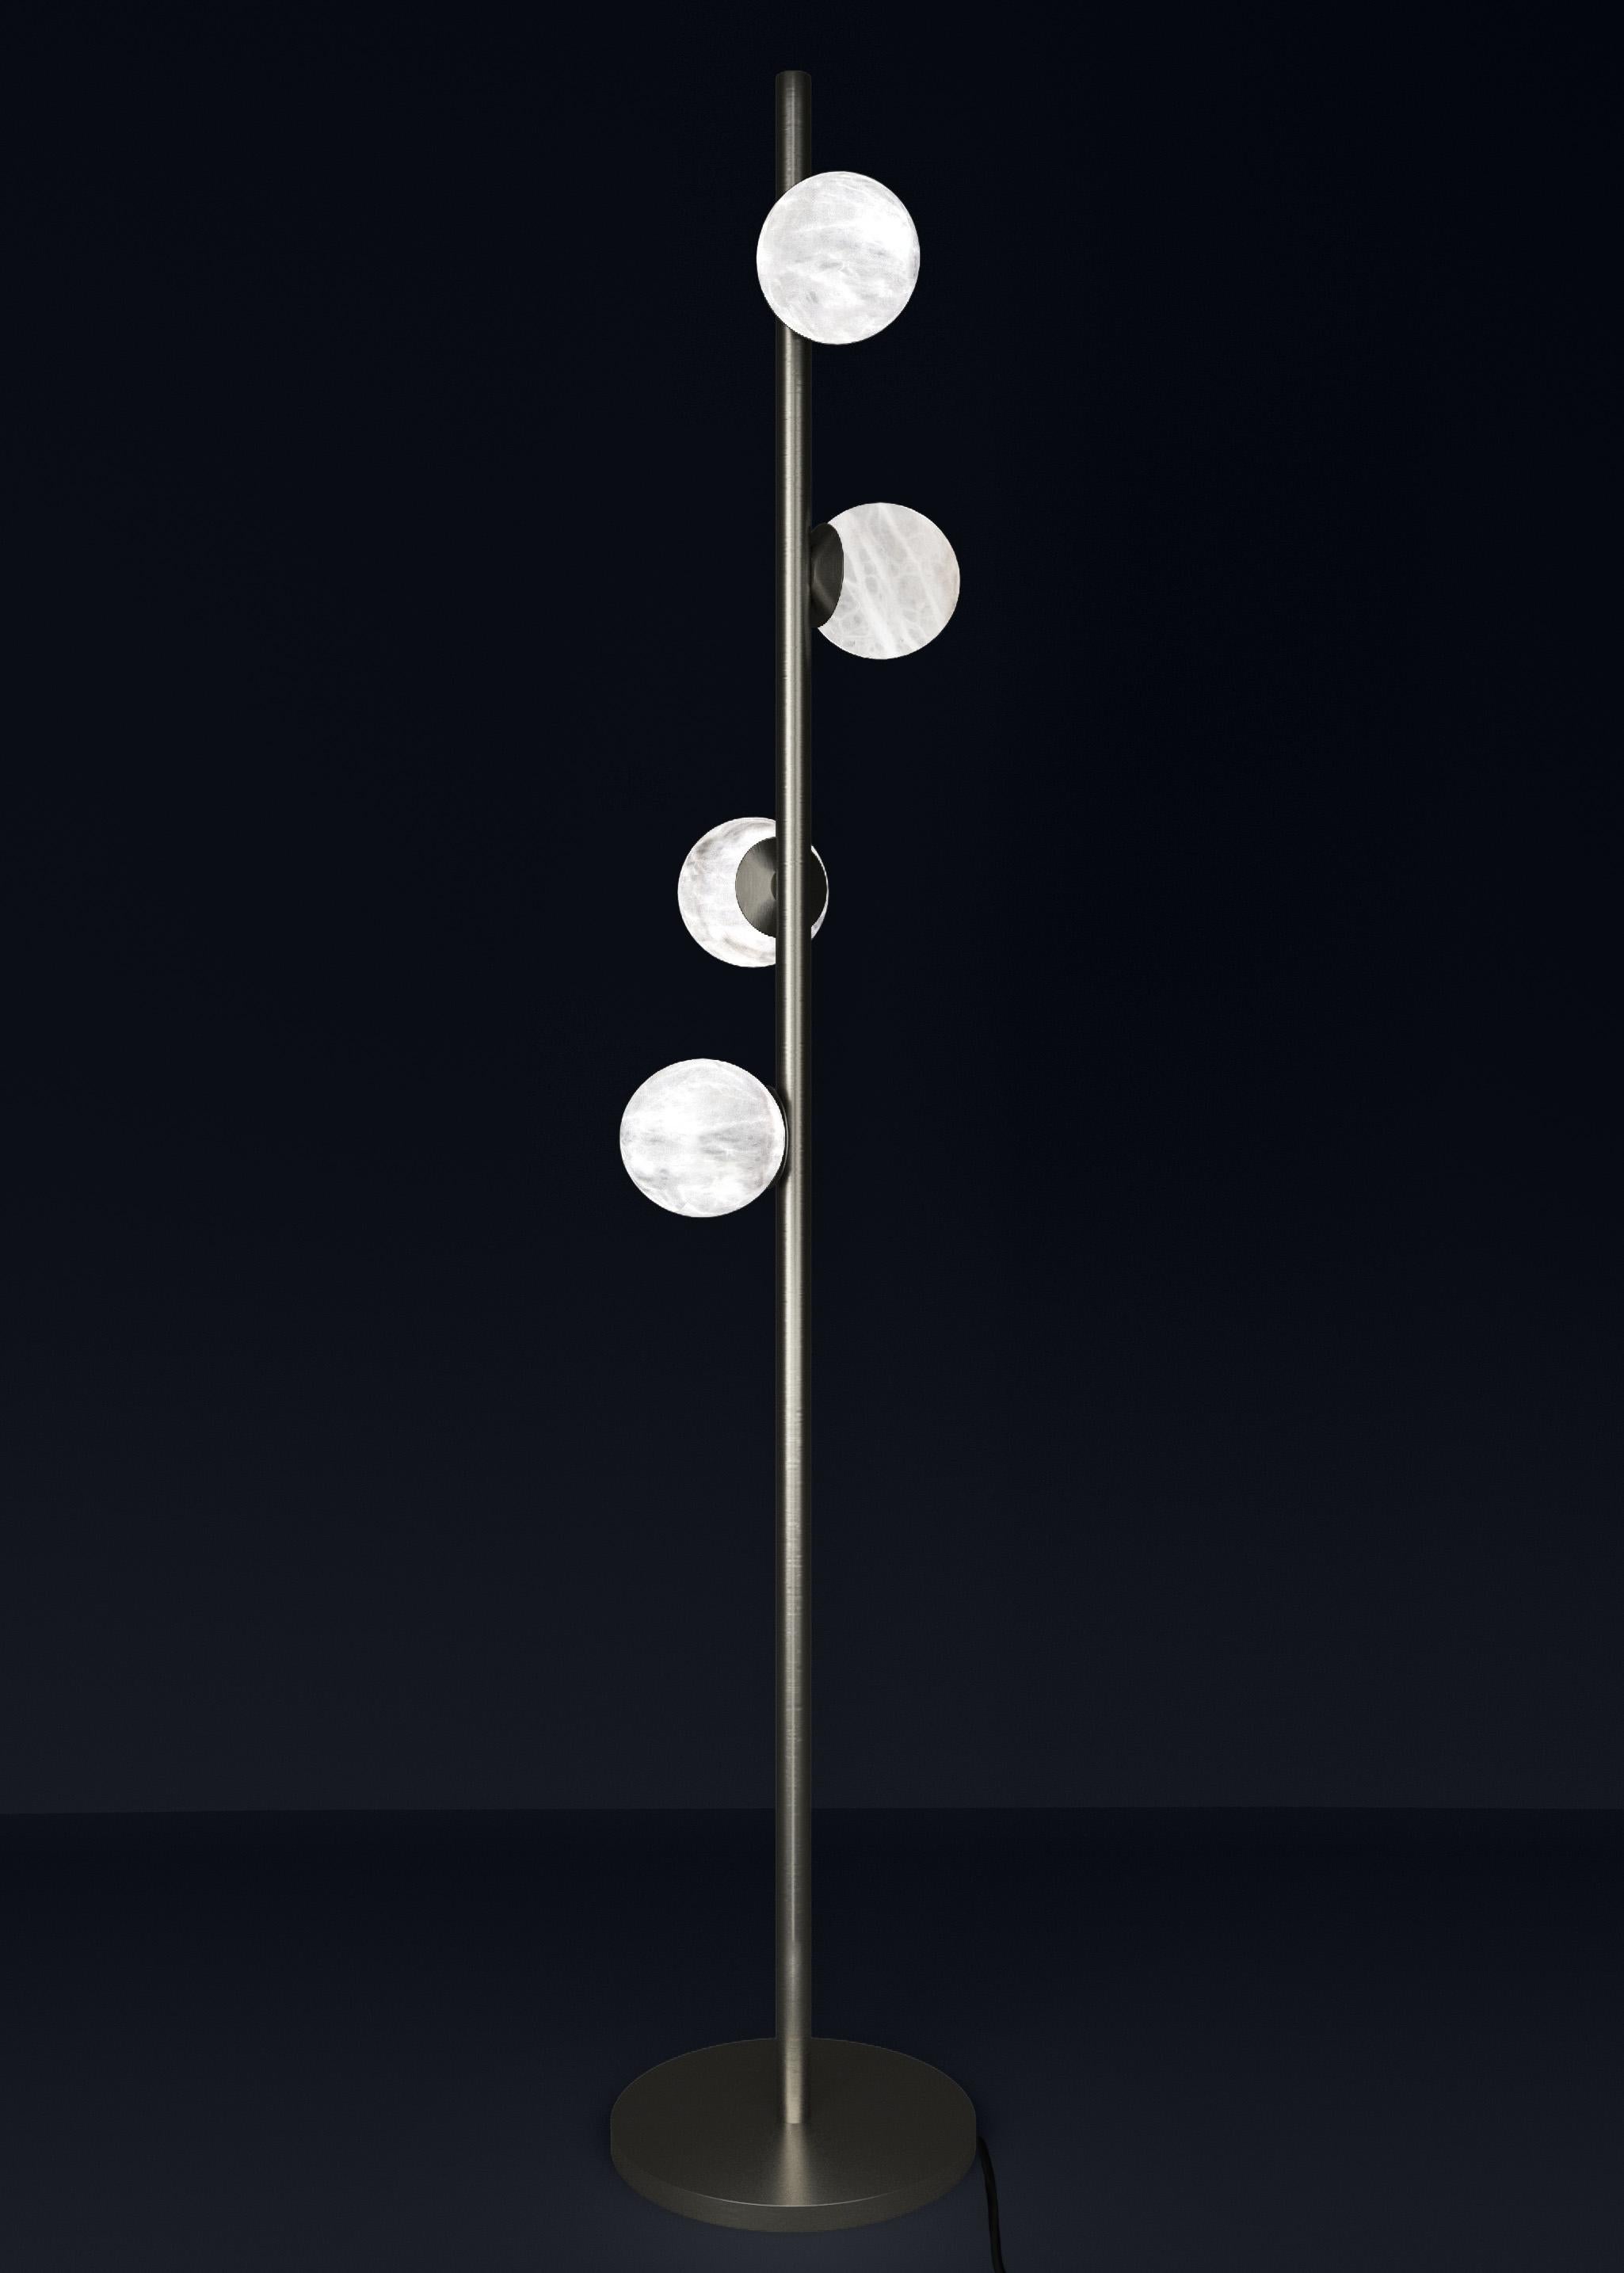 Ofione Brushed Black Metal Floor Lamp by Alabastro Italiano
Dimensions: D 50 x W 50 x H 170 cm.
Materials: White alabaster and metal.

Available in different finishes: Shiny Silver, Bronze, Brushed Brass, Matte Black, Ruggine of Florence, Brushed